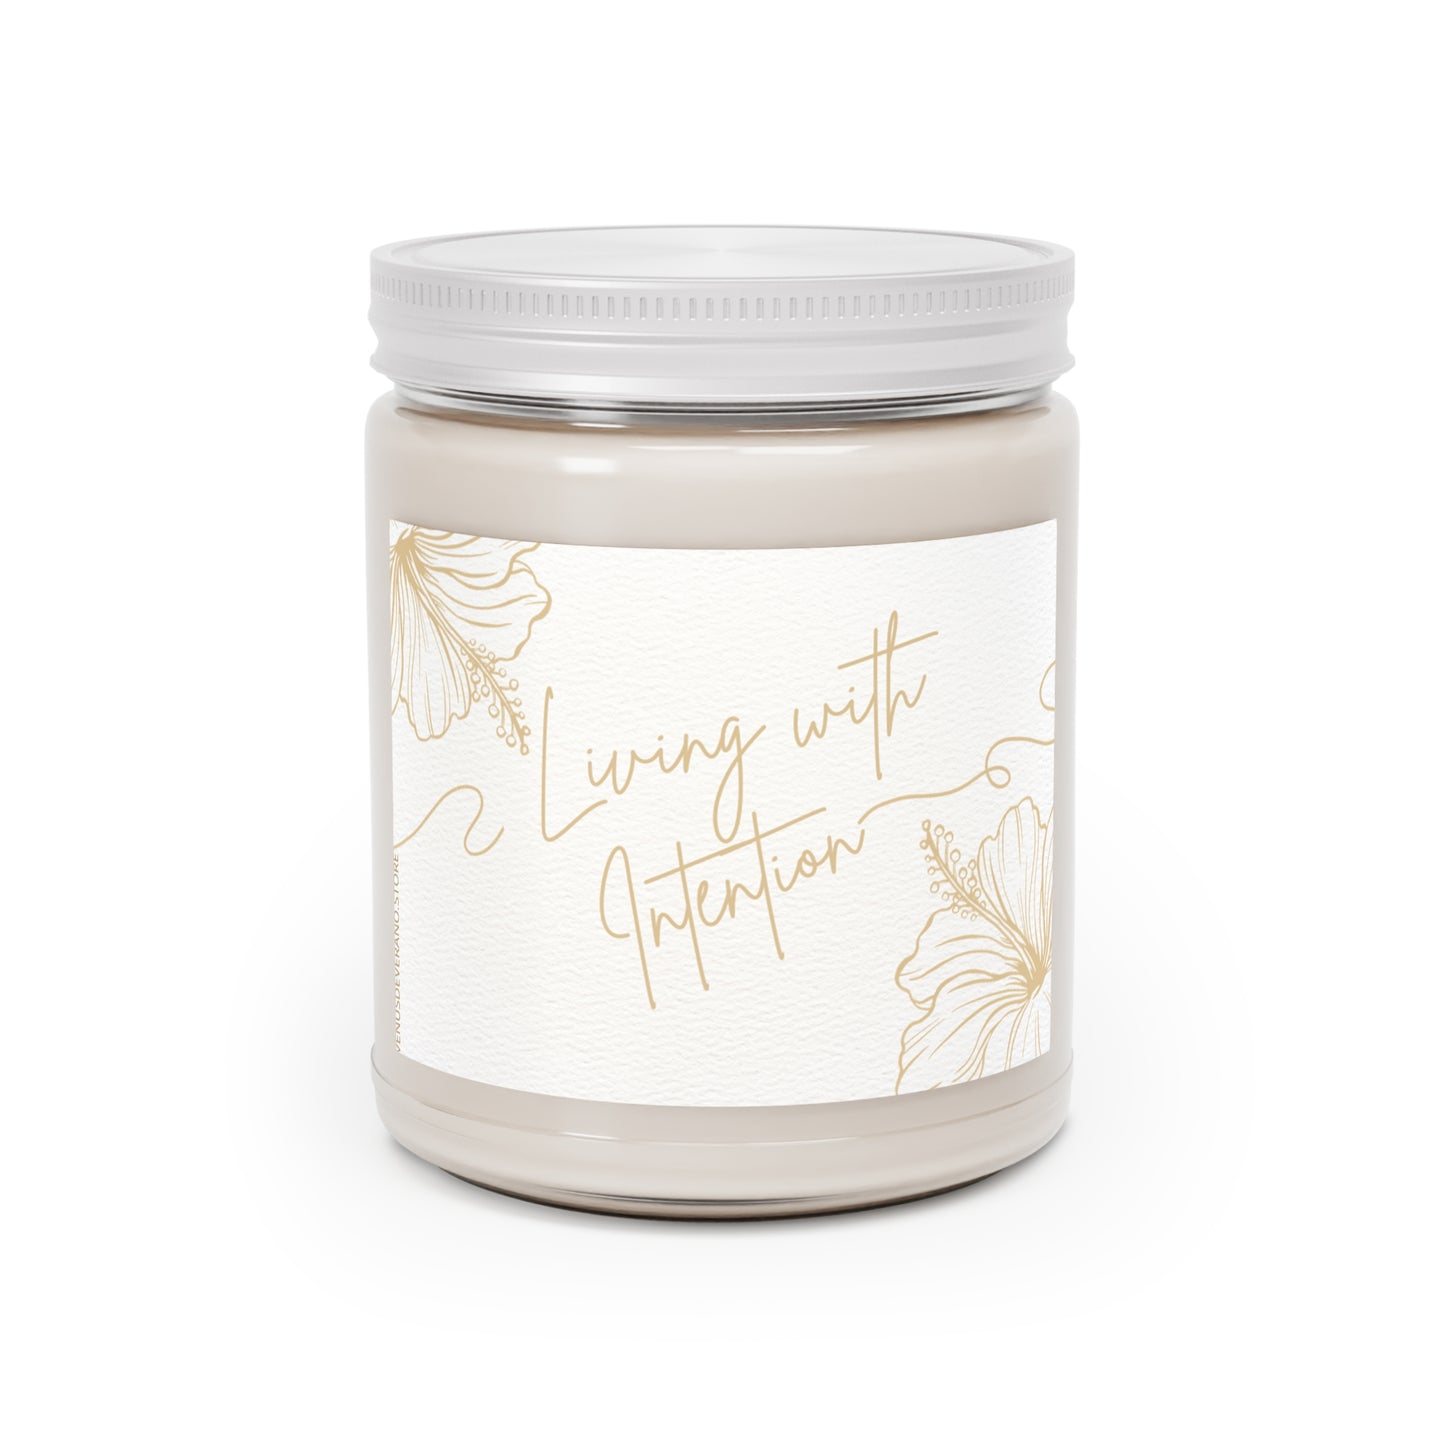 Scented Candles, 9oz - Living with INTENTION- Made 100% natural soy wax blend and cotton wick - Vanilla Bean, Comfort Spice and Sea Breeze fragrances available.